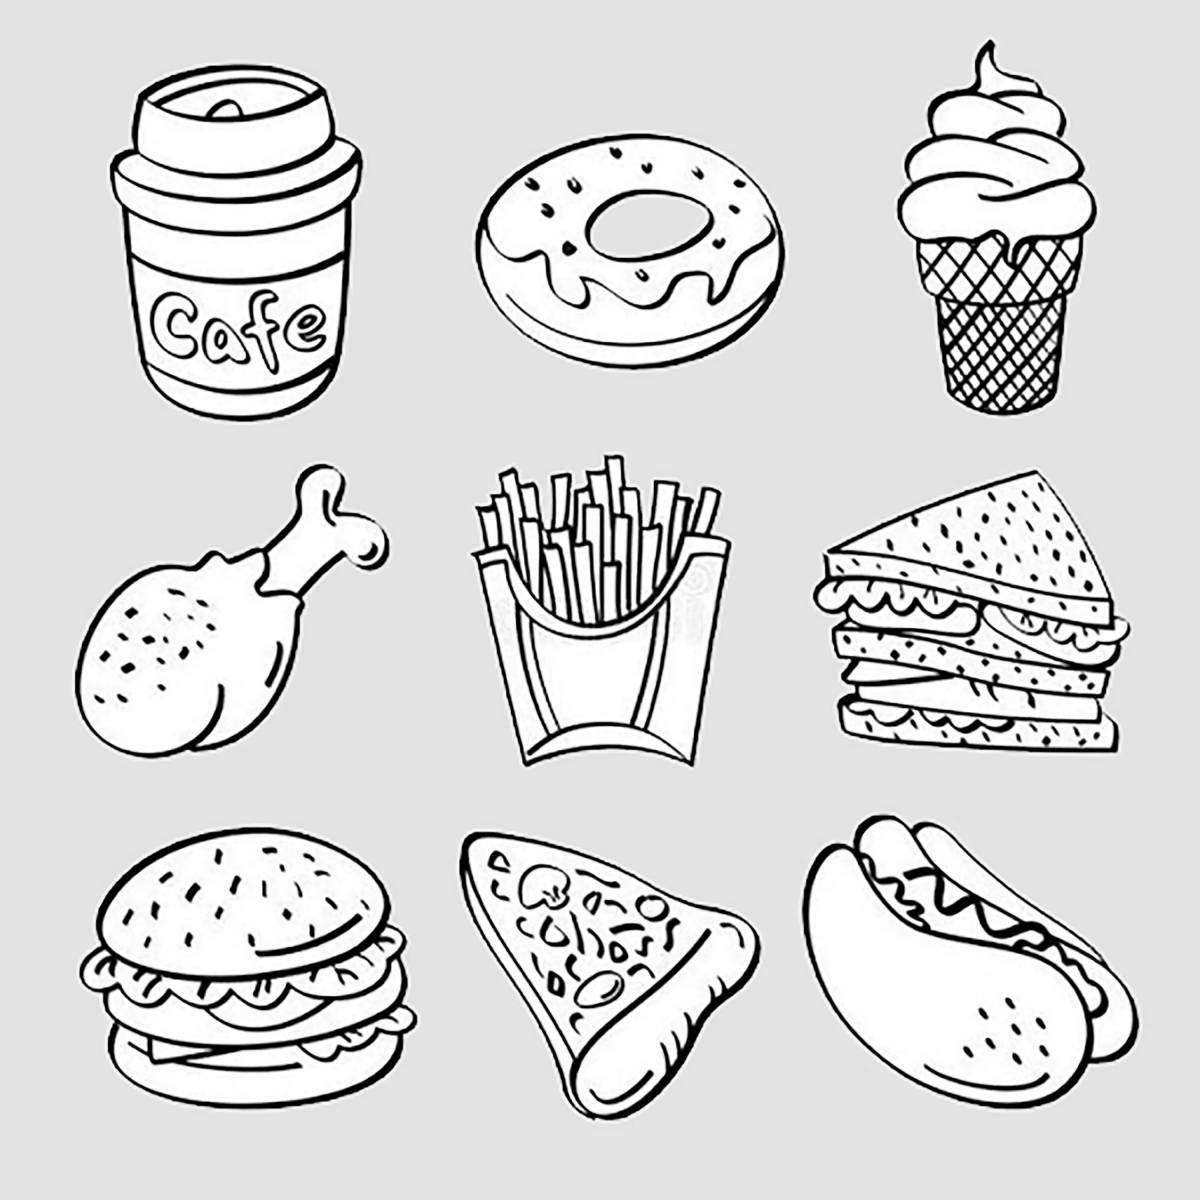 Healthy food coloring pages welcome